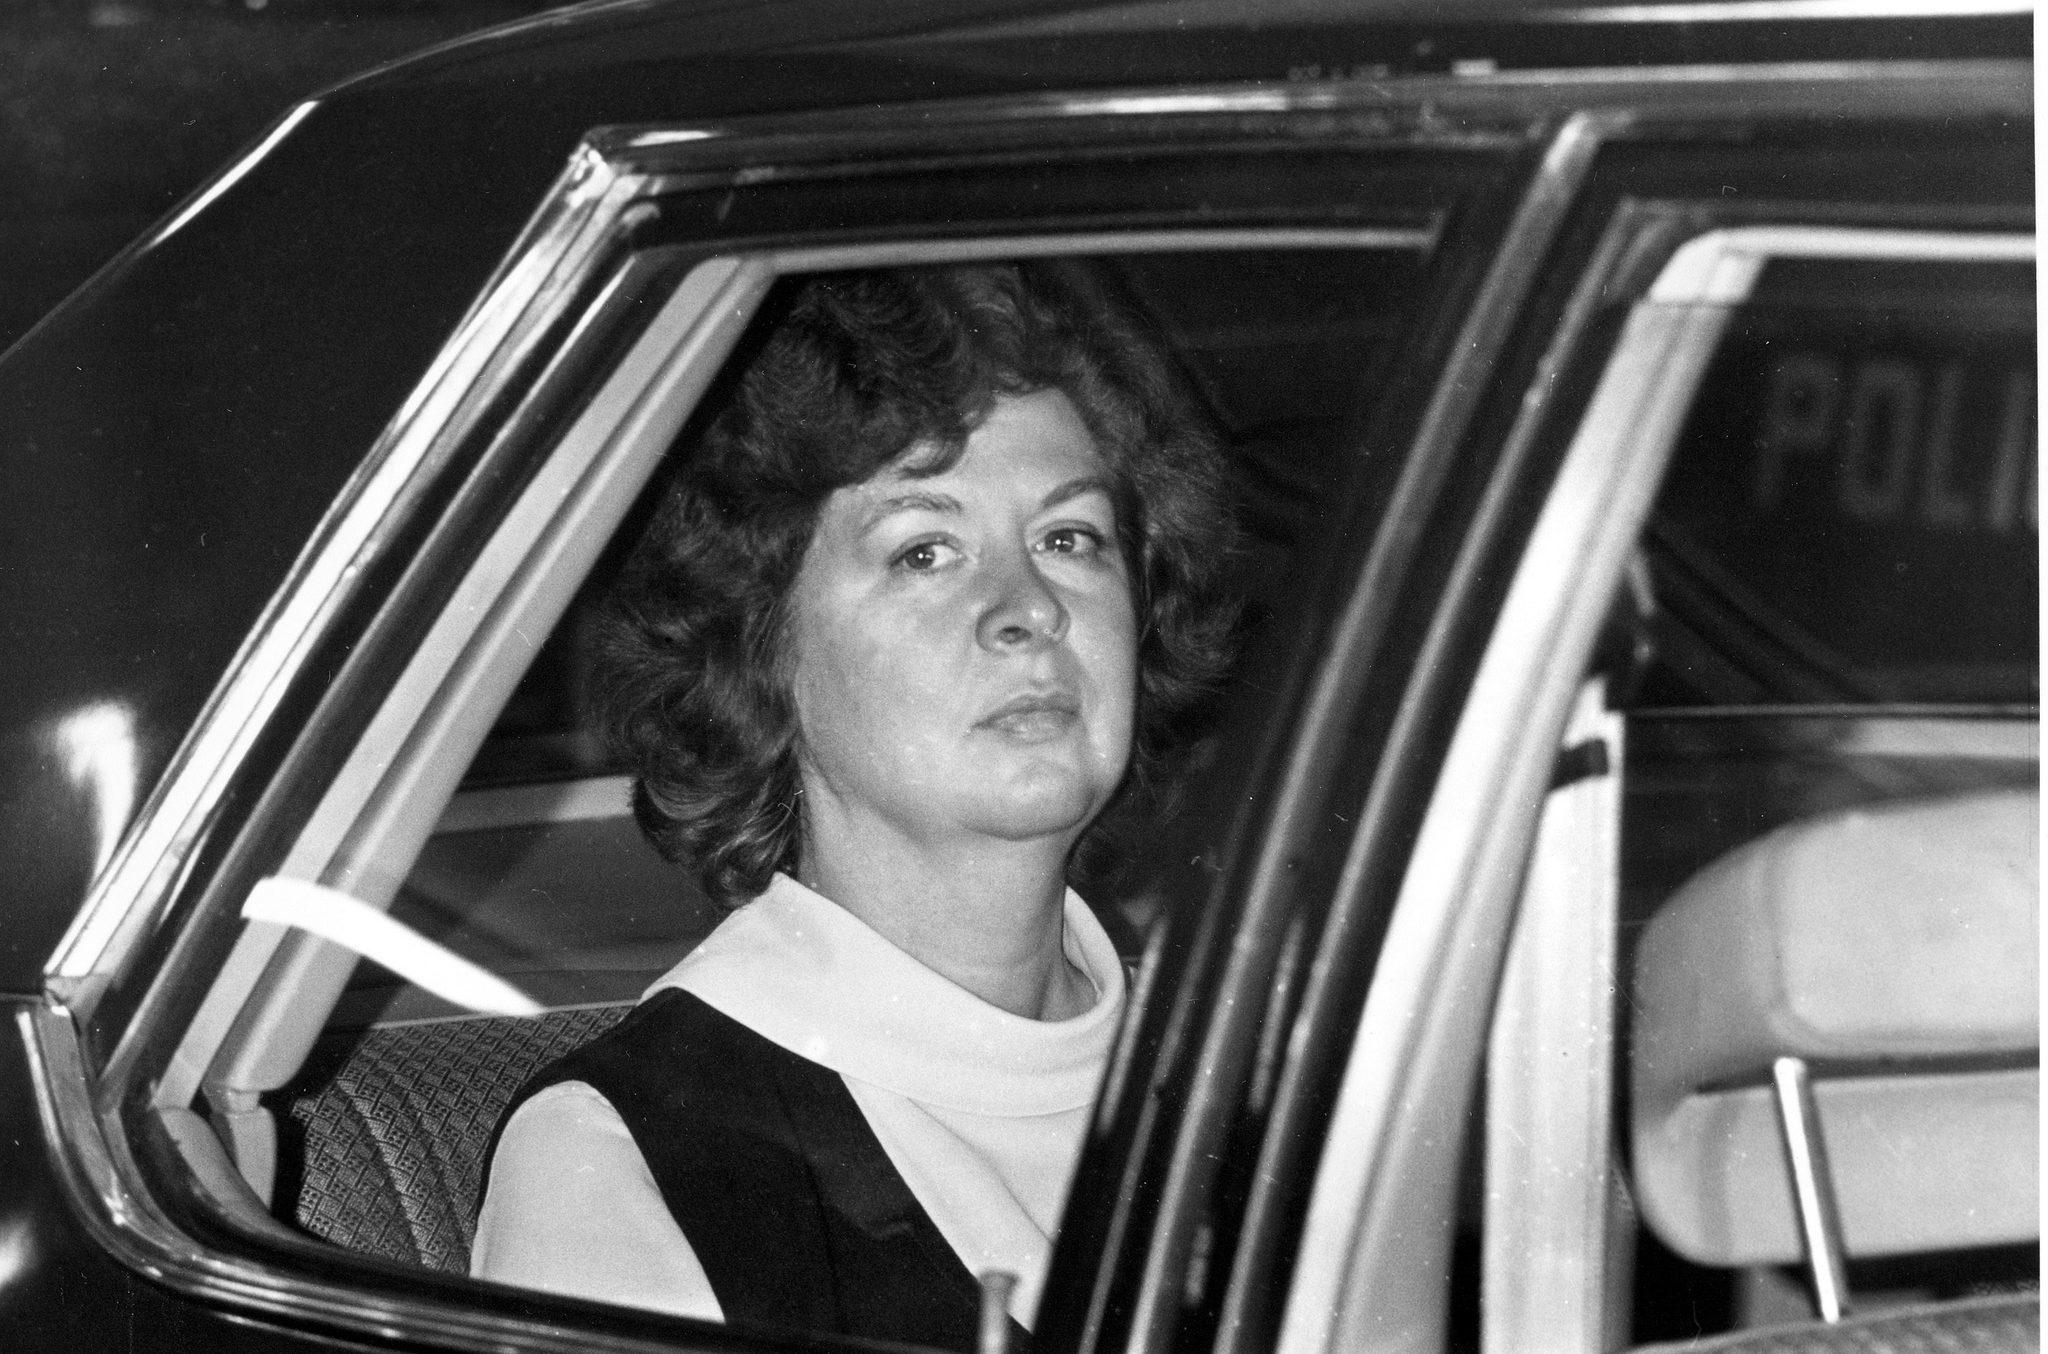 Sara Jane Moore on her way to federal court in 1975 in San Francisco, where a judge accepted her guilty plea for trying to kill President Gerald Ford.